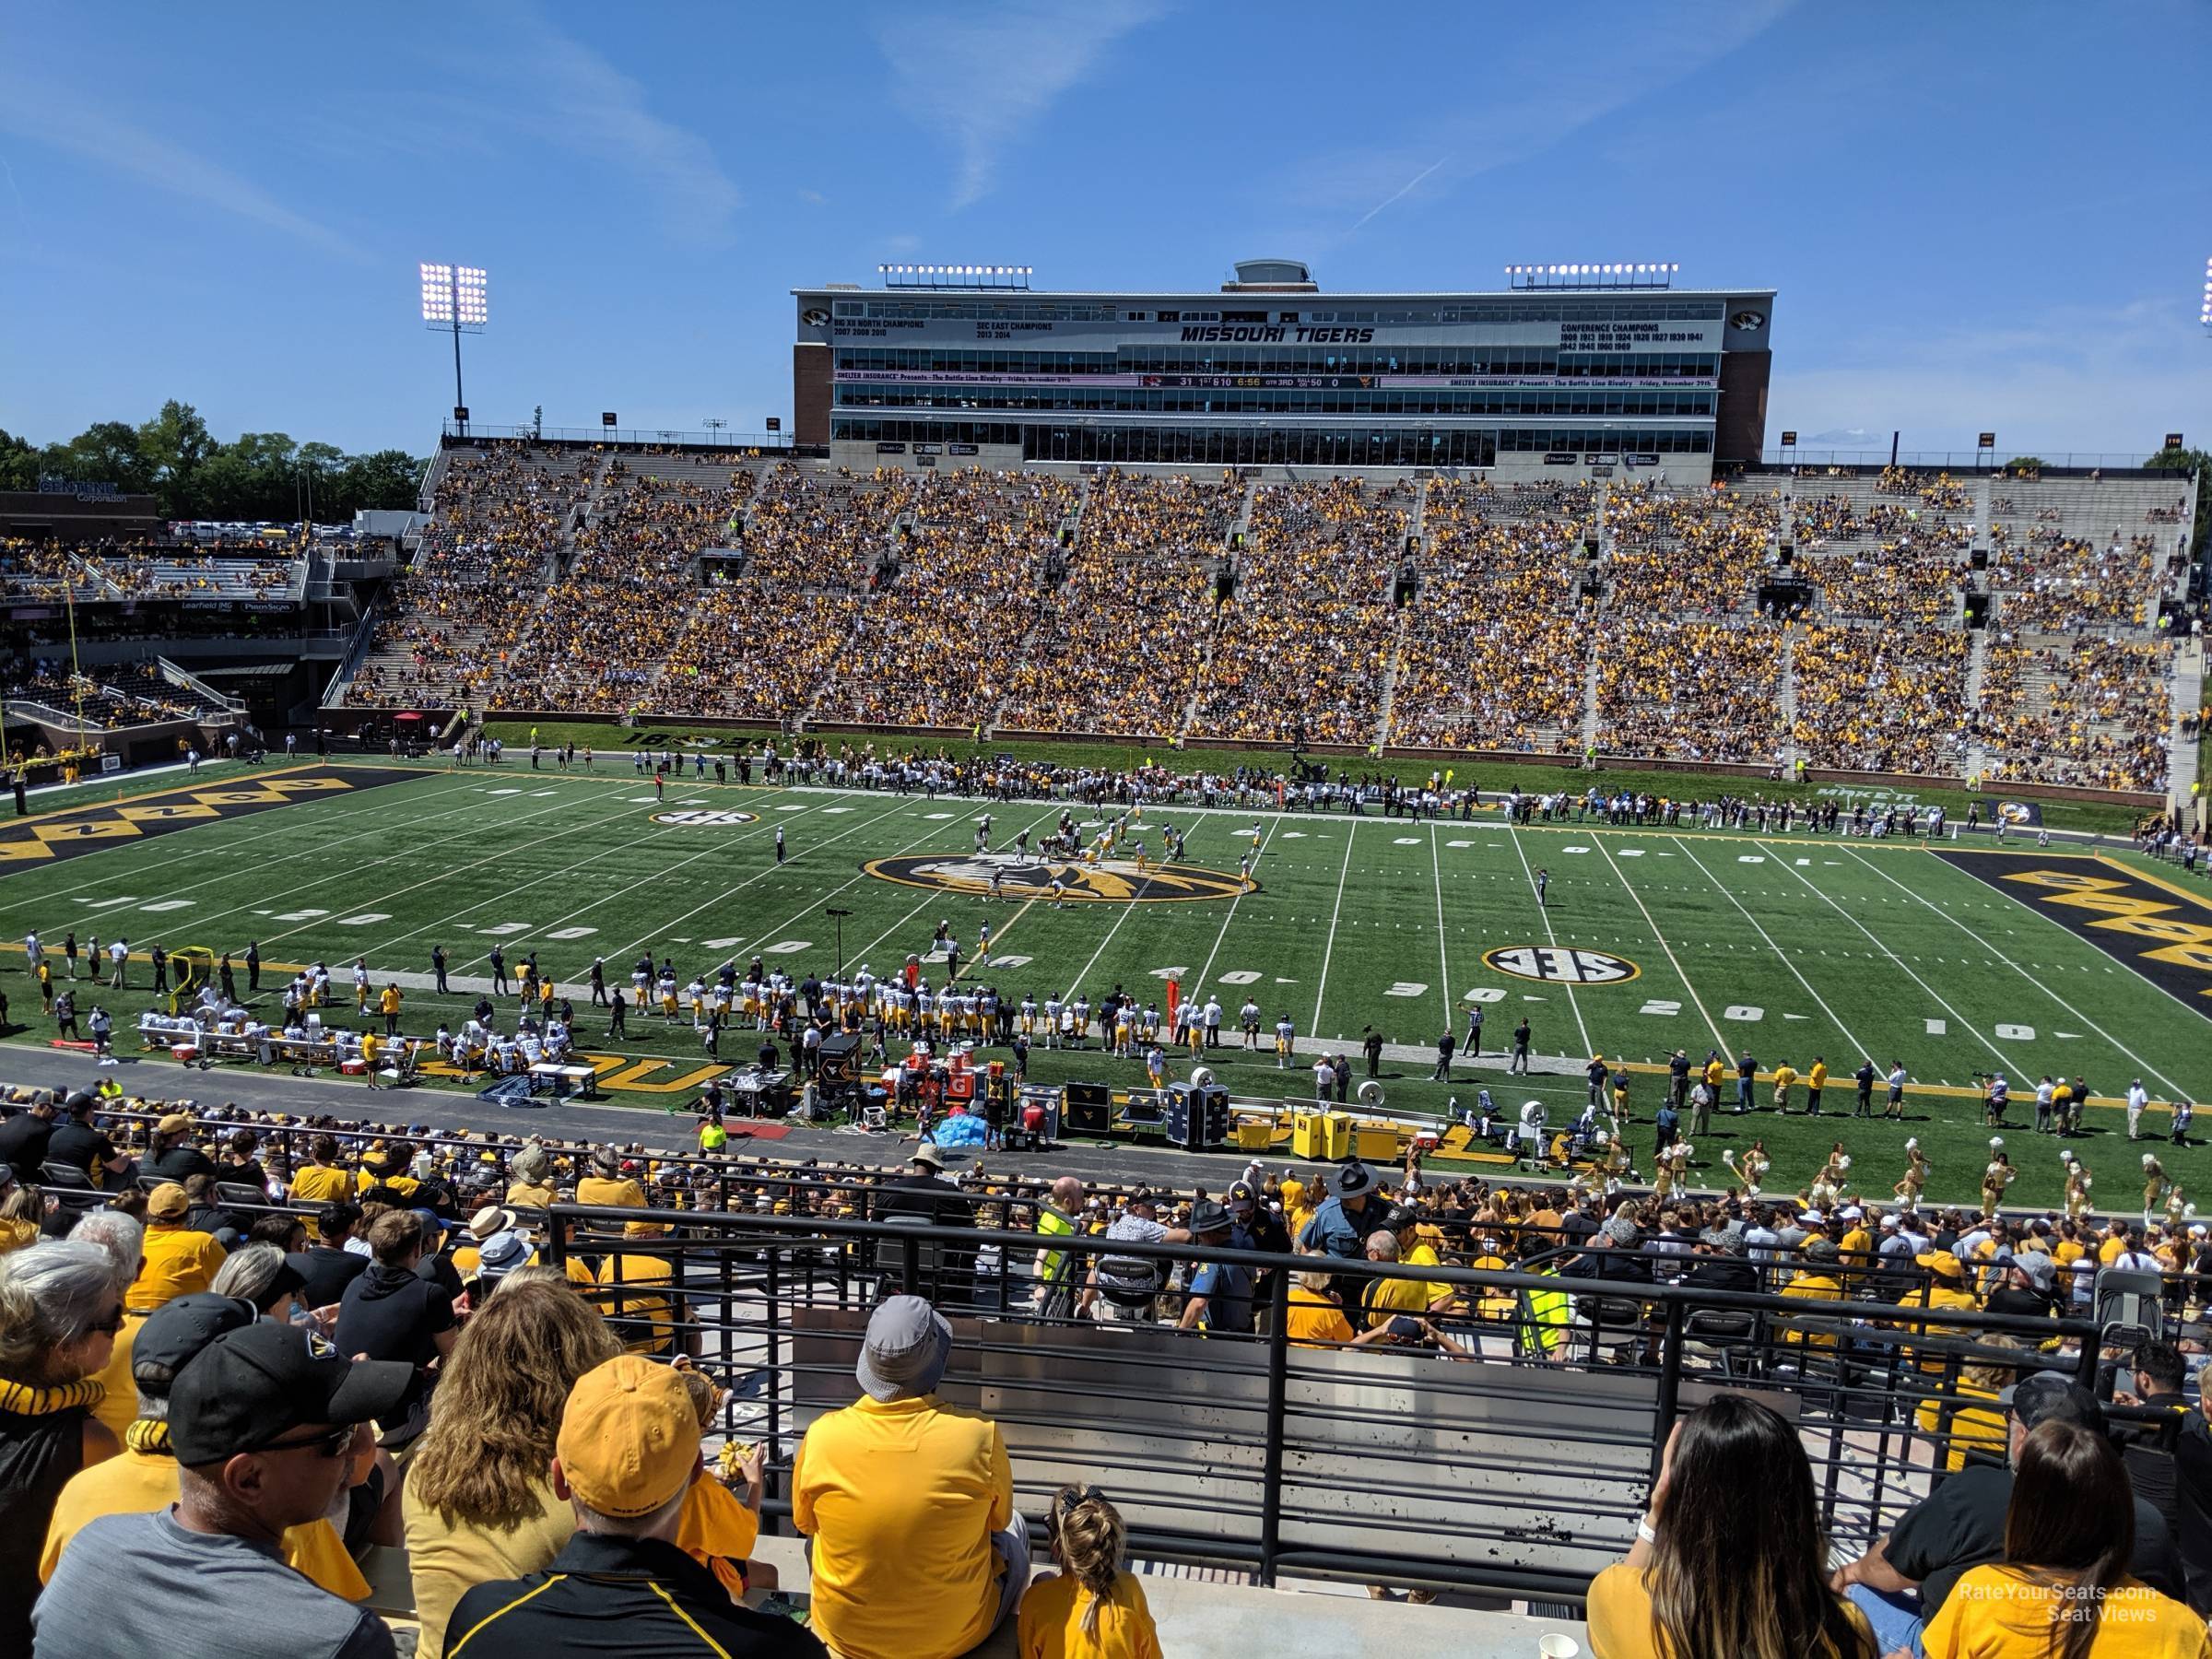 section 107, row 54 seat view  - faurot field